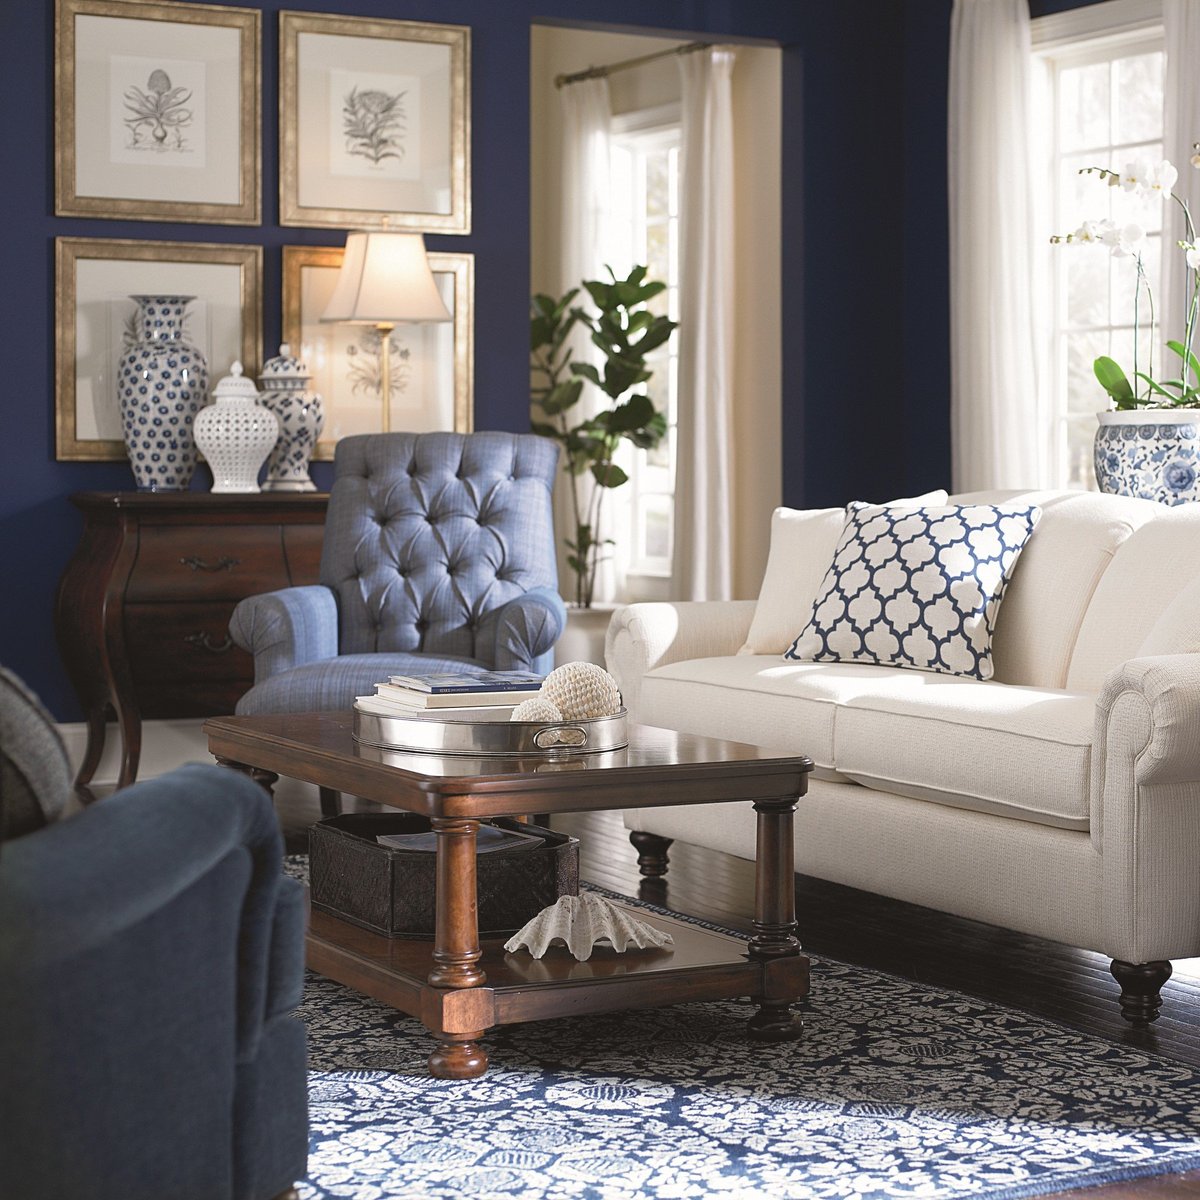 Navy and White - White Living Room Ideas